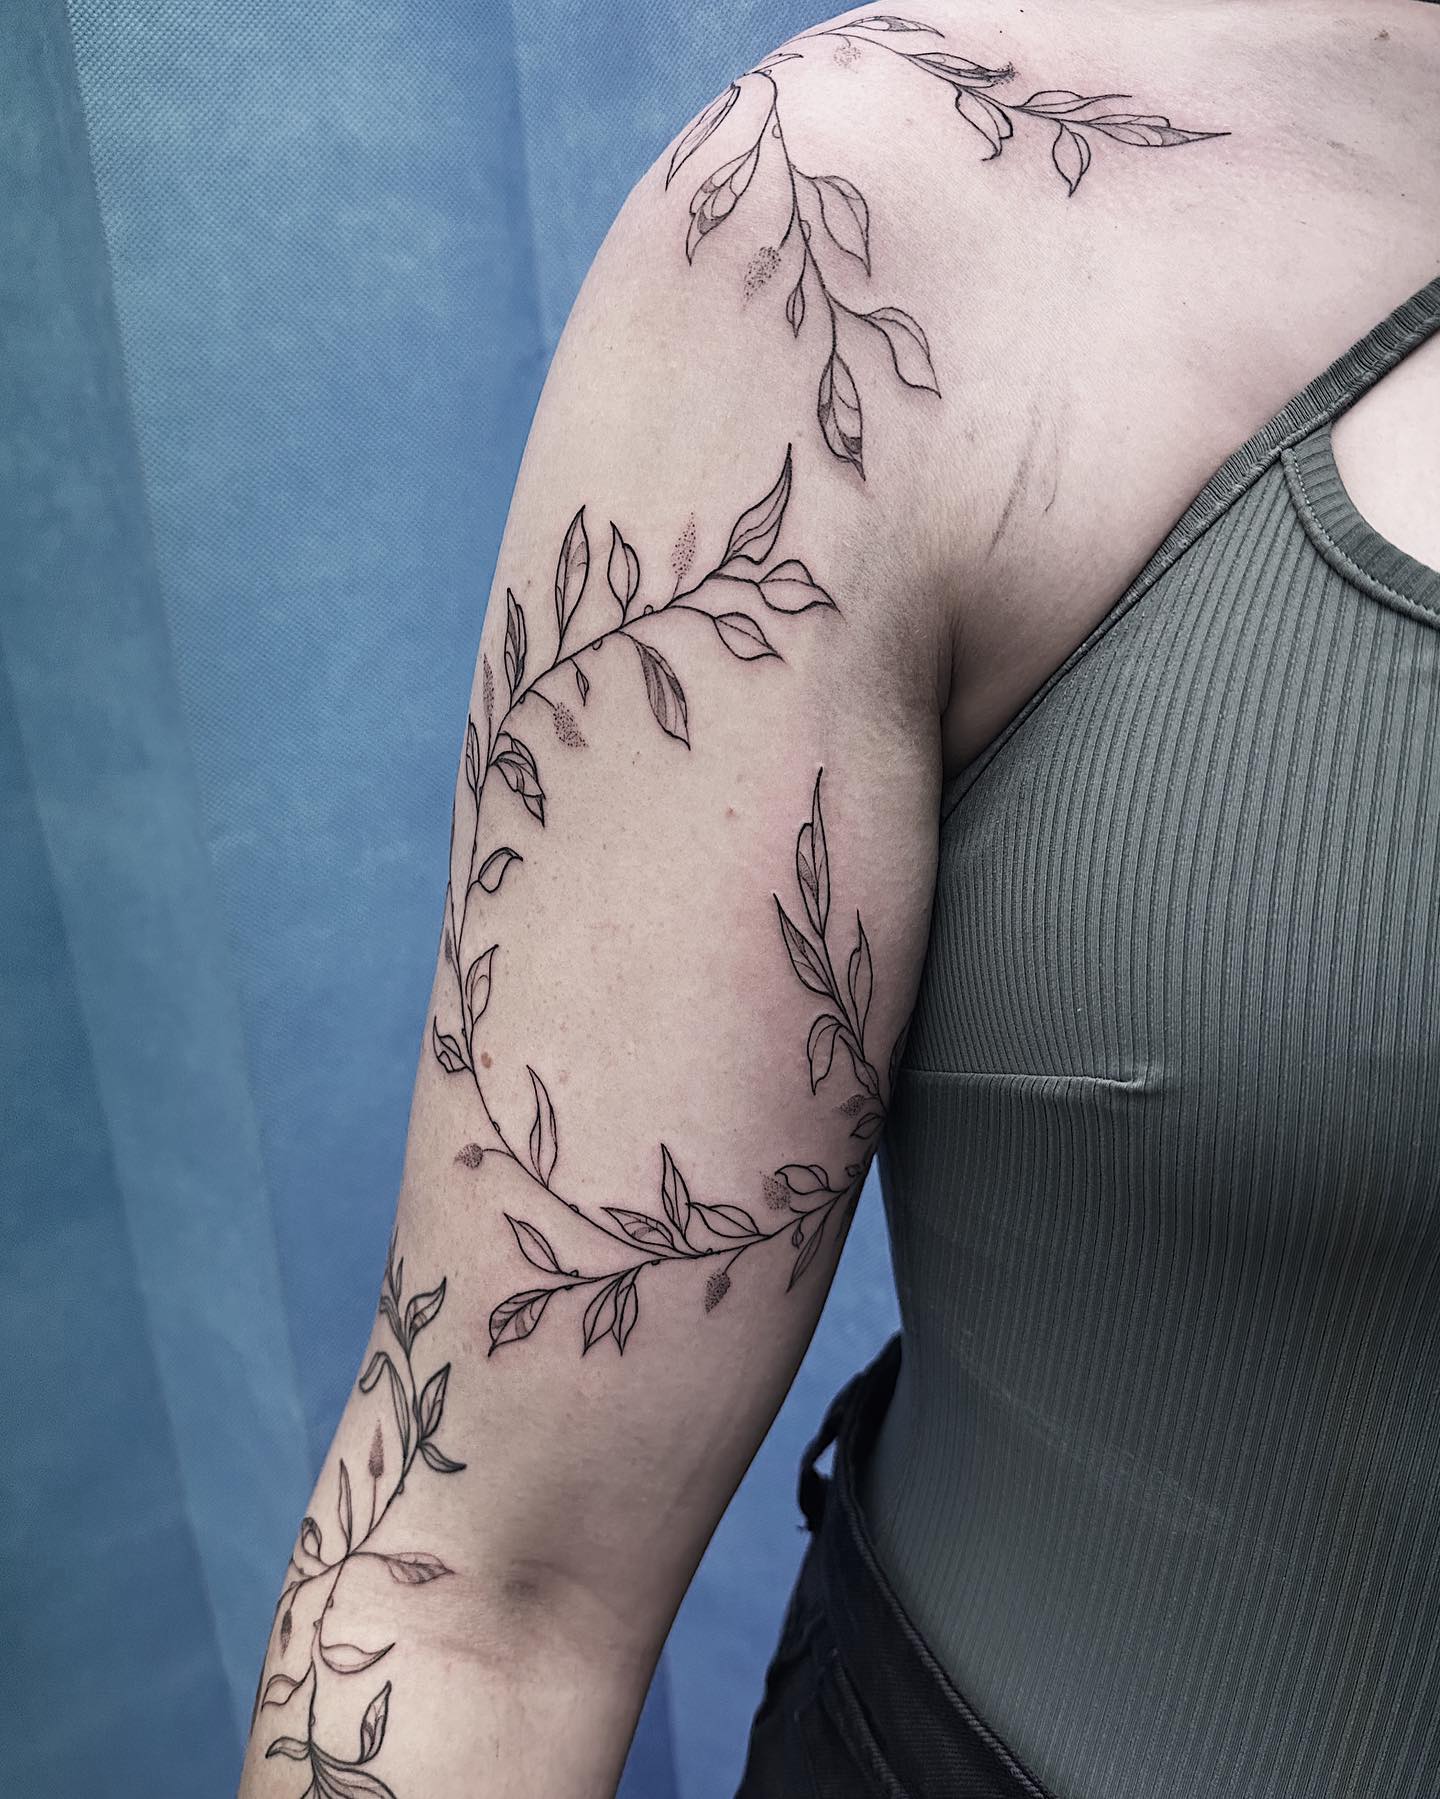 Freehanded this cute leaf design to extend Nicolas’s existing piece from another artist 🍃

Absolutely love freehanding designs to suit the body ✨

Swipe for the doodle ➡️

    